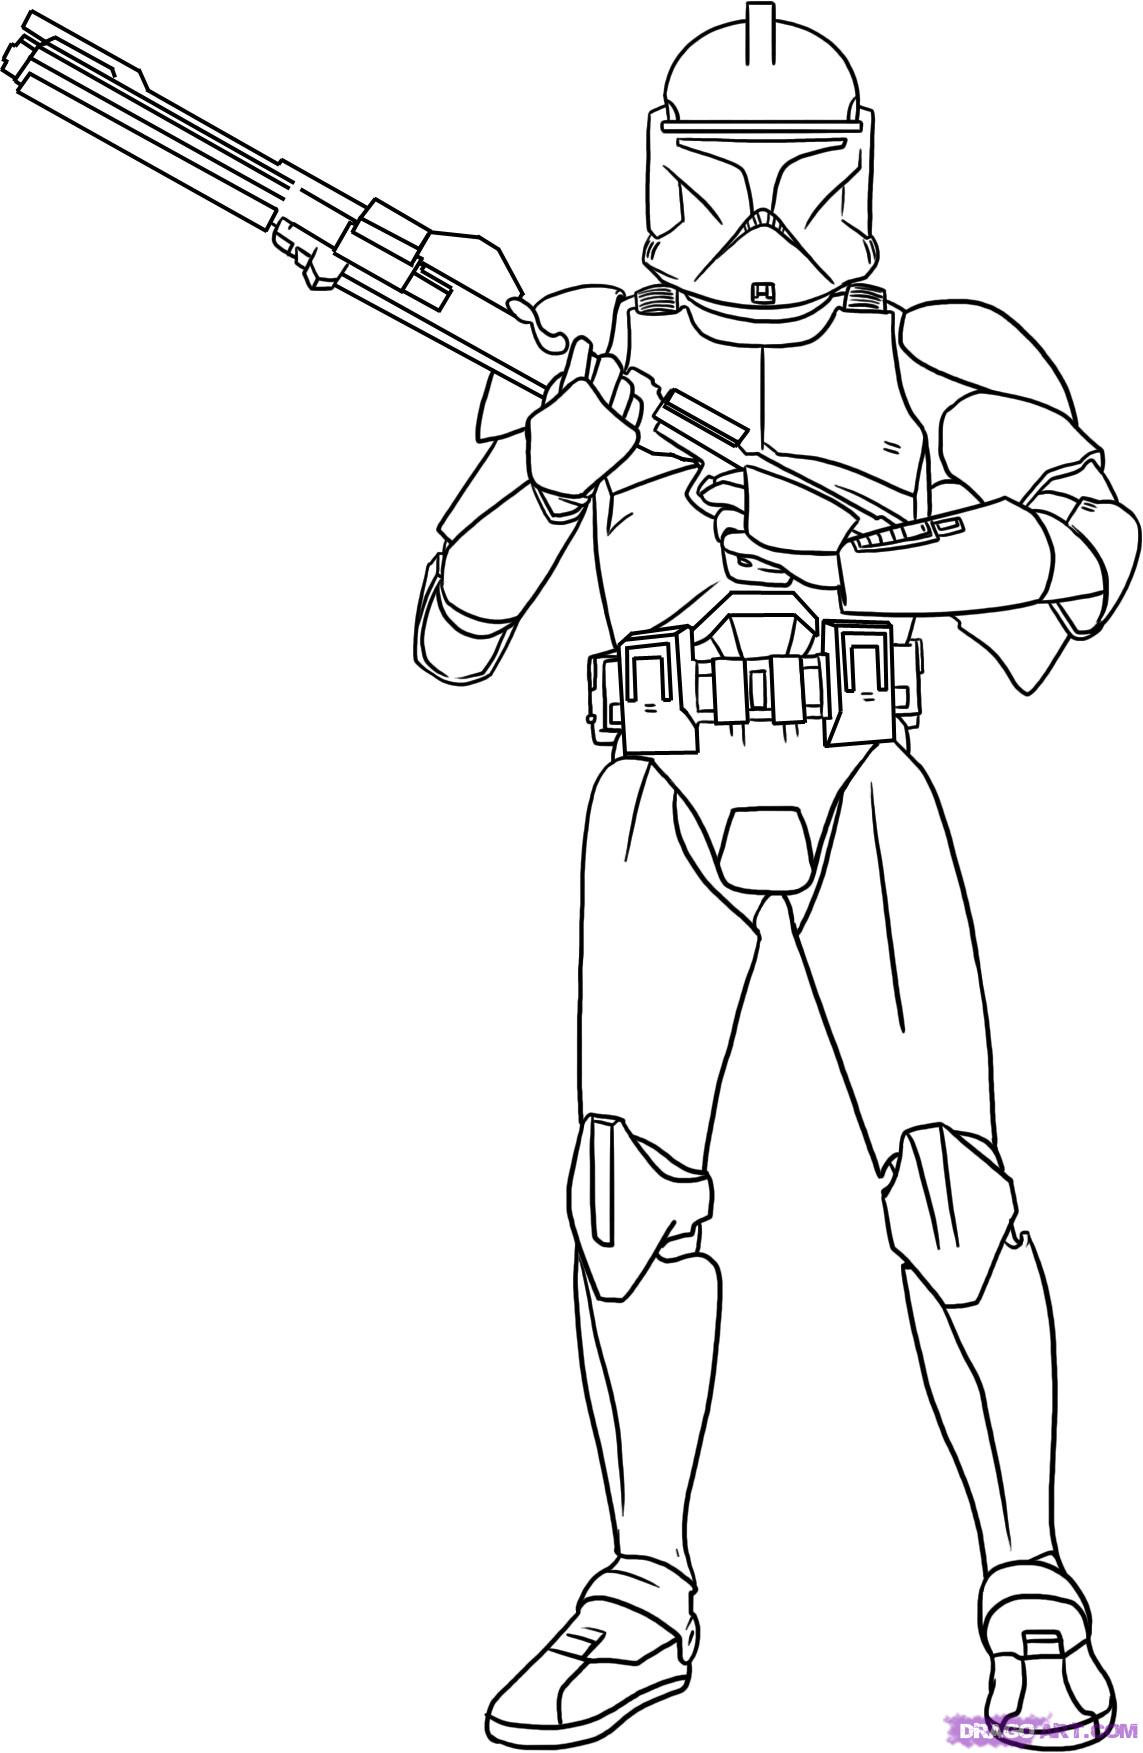 Printable Coloring Pages Star Wars from Free Printable Star Wars Coloring P...